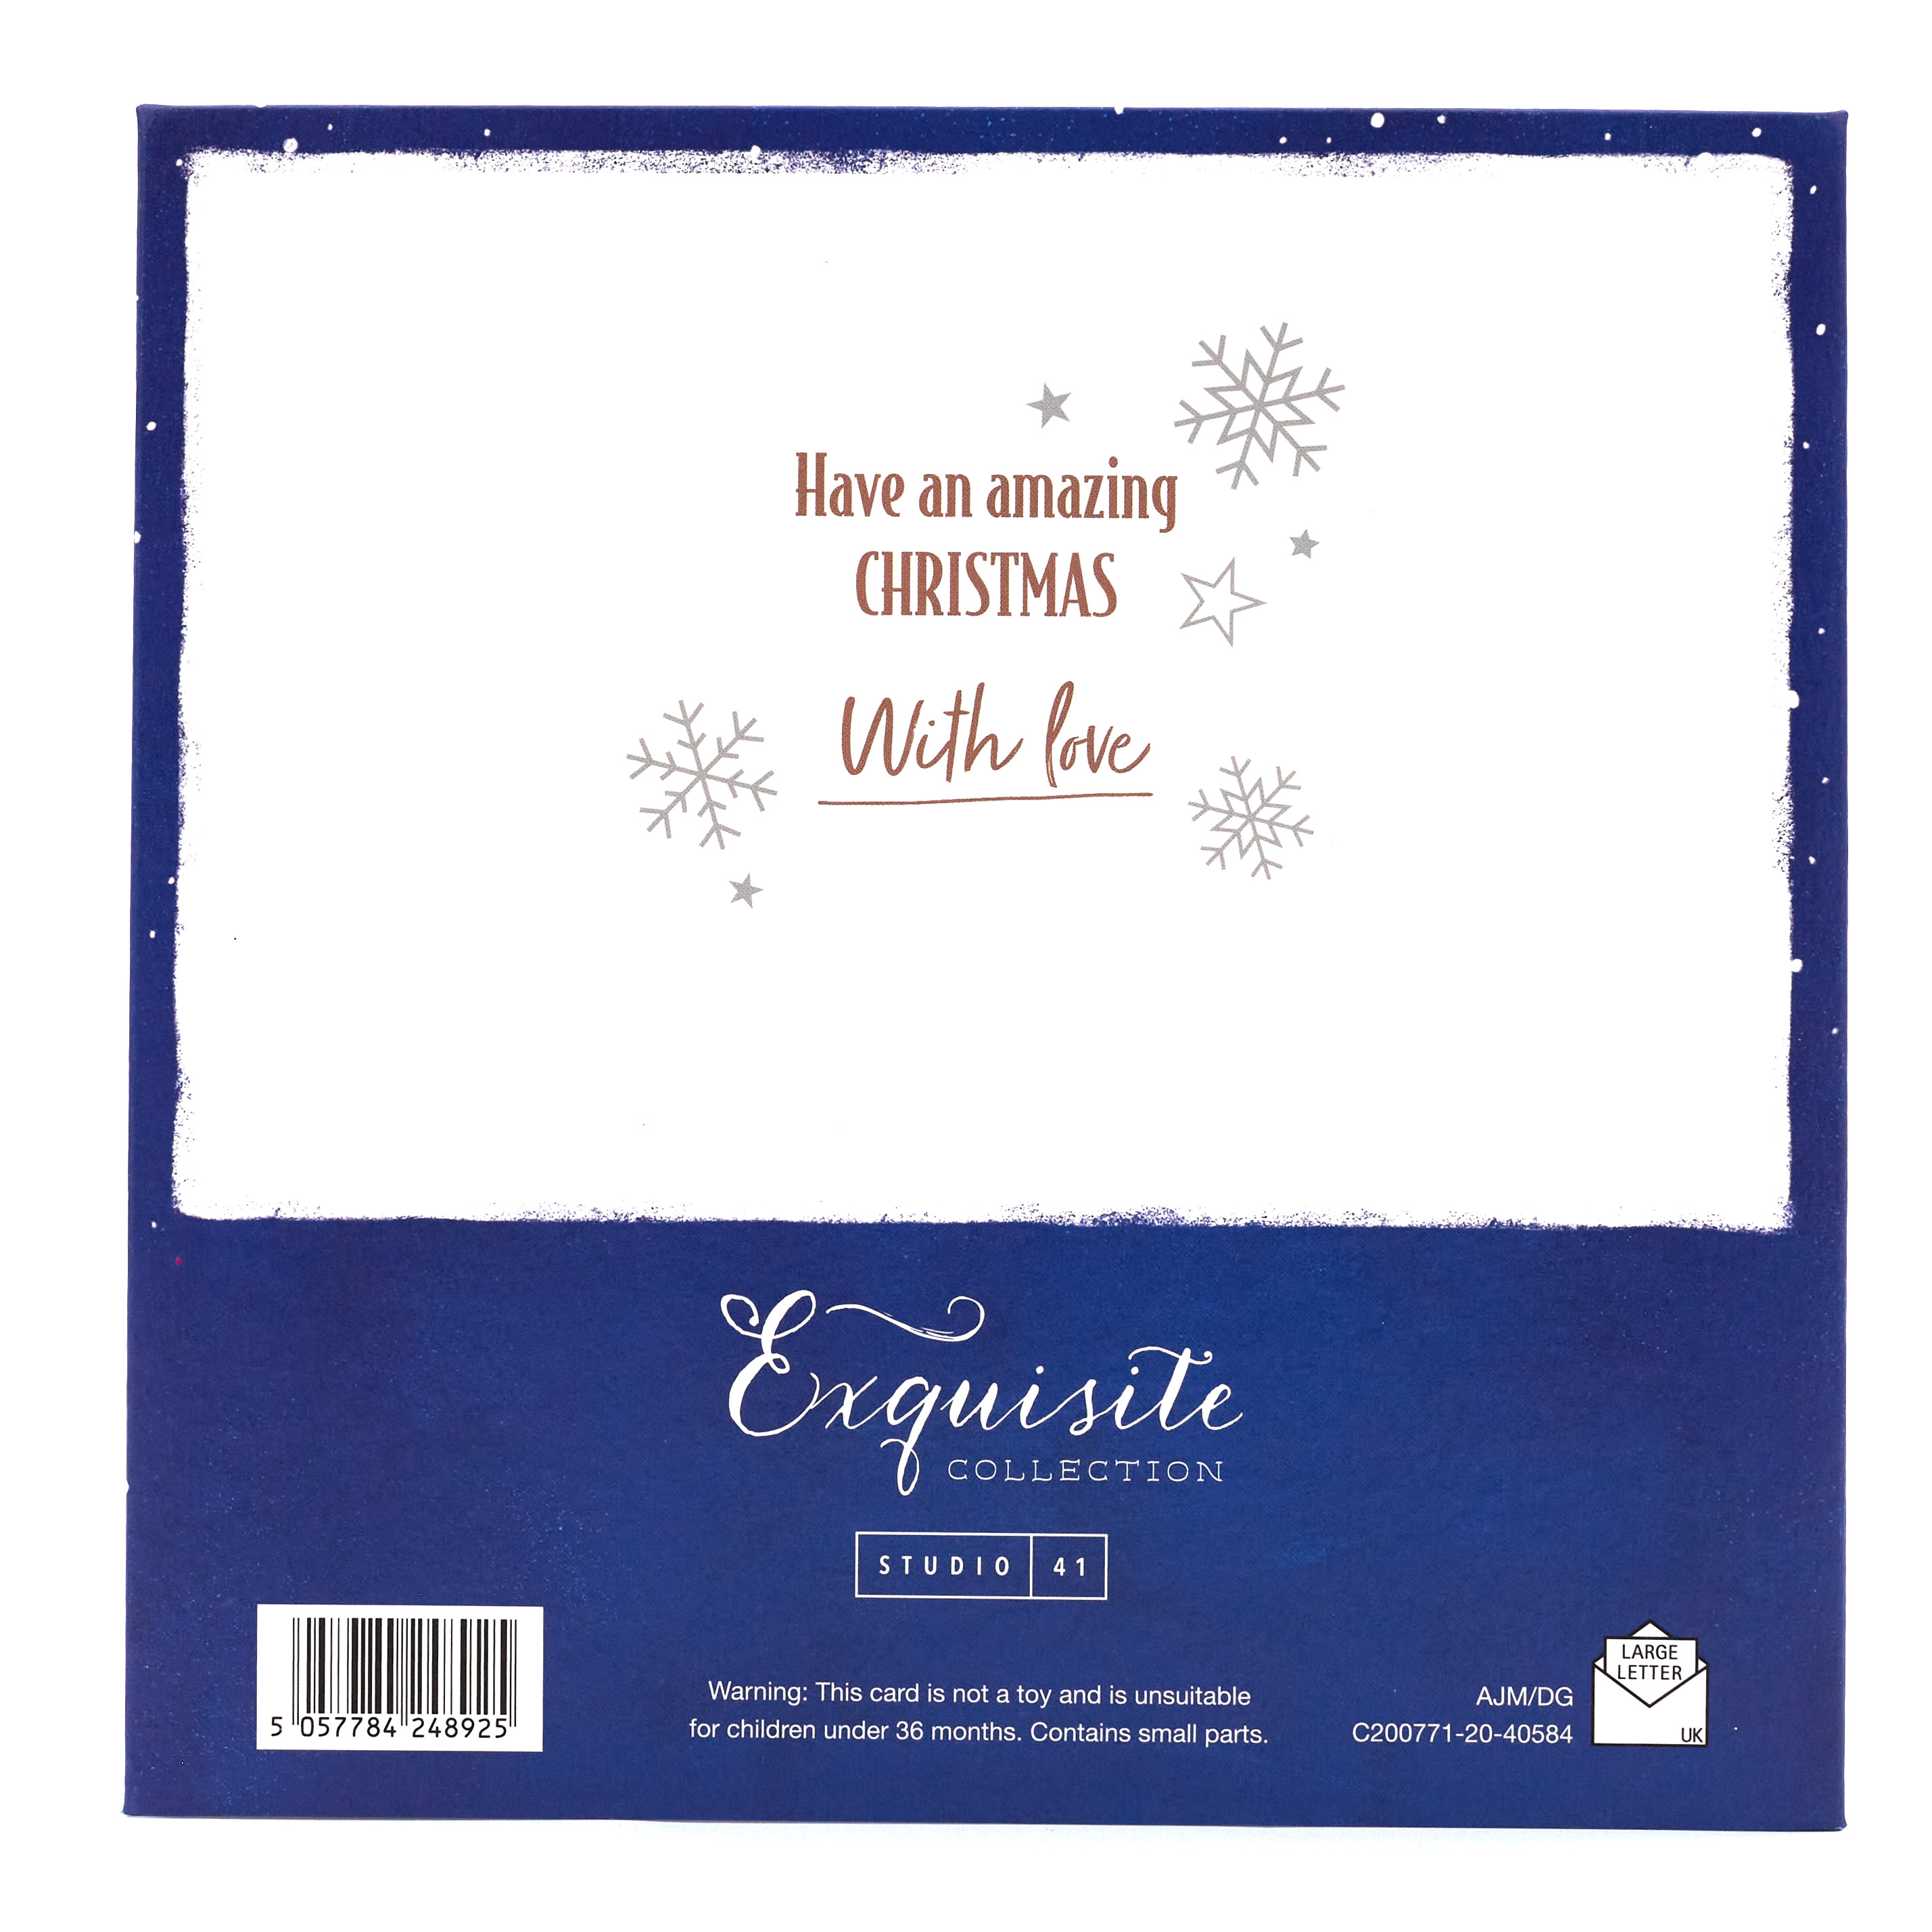 Exquisite Collection Christmas Card - Son, Blue Star